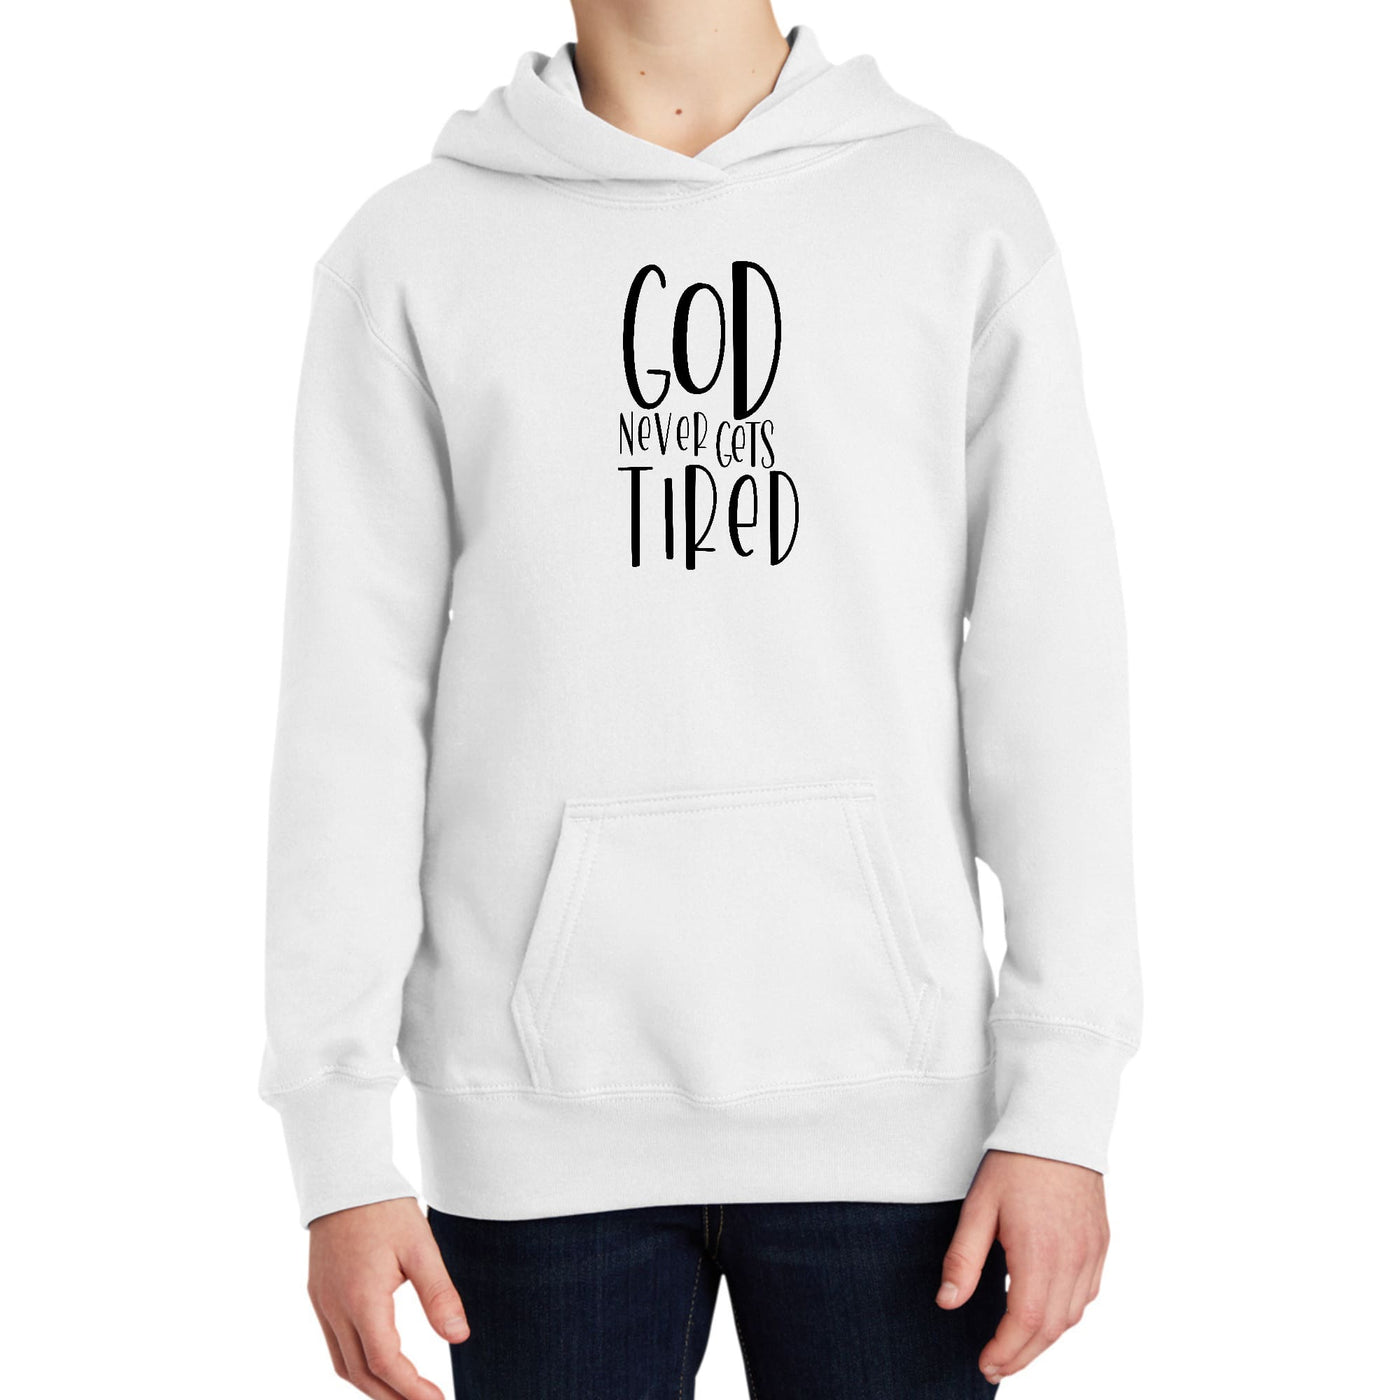 Youth Long Sleeve Hoodie Say It Soul - God Never Gets Tired - Black - Youth